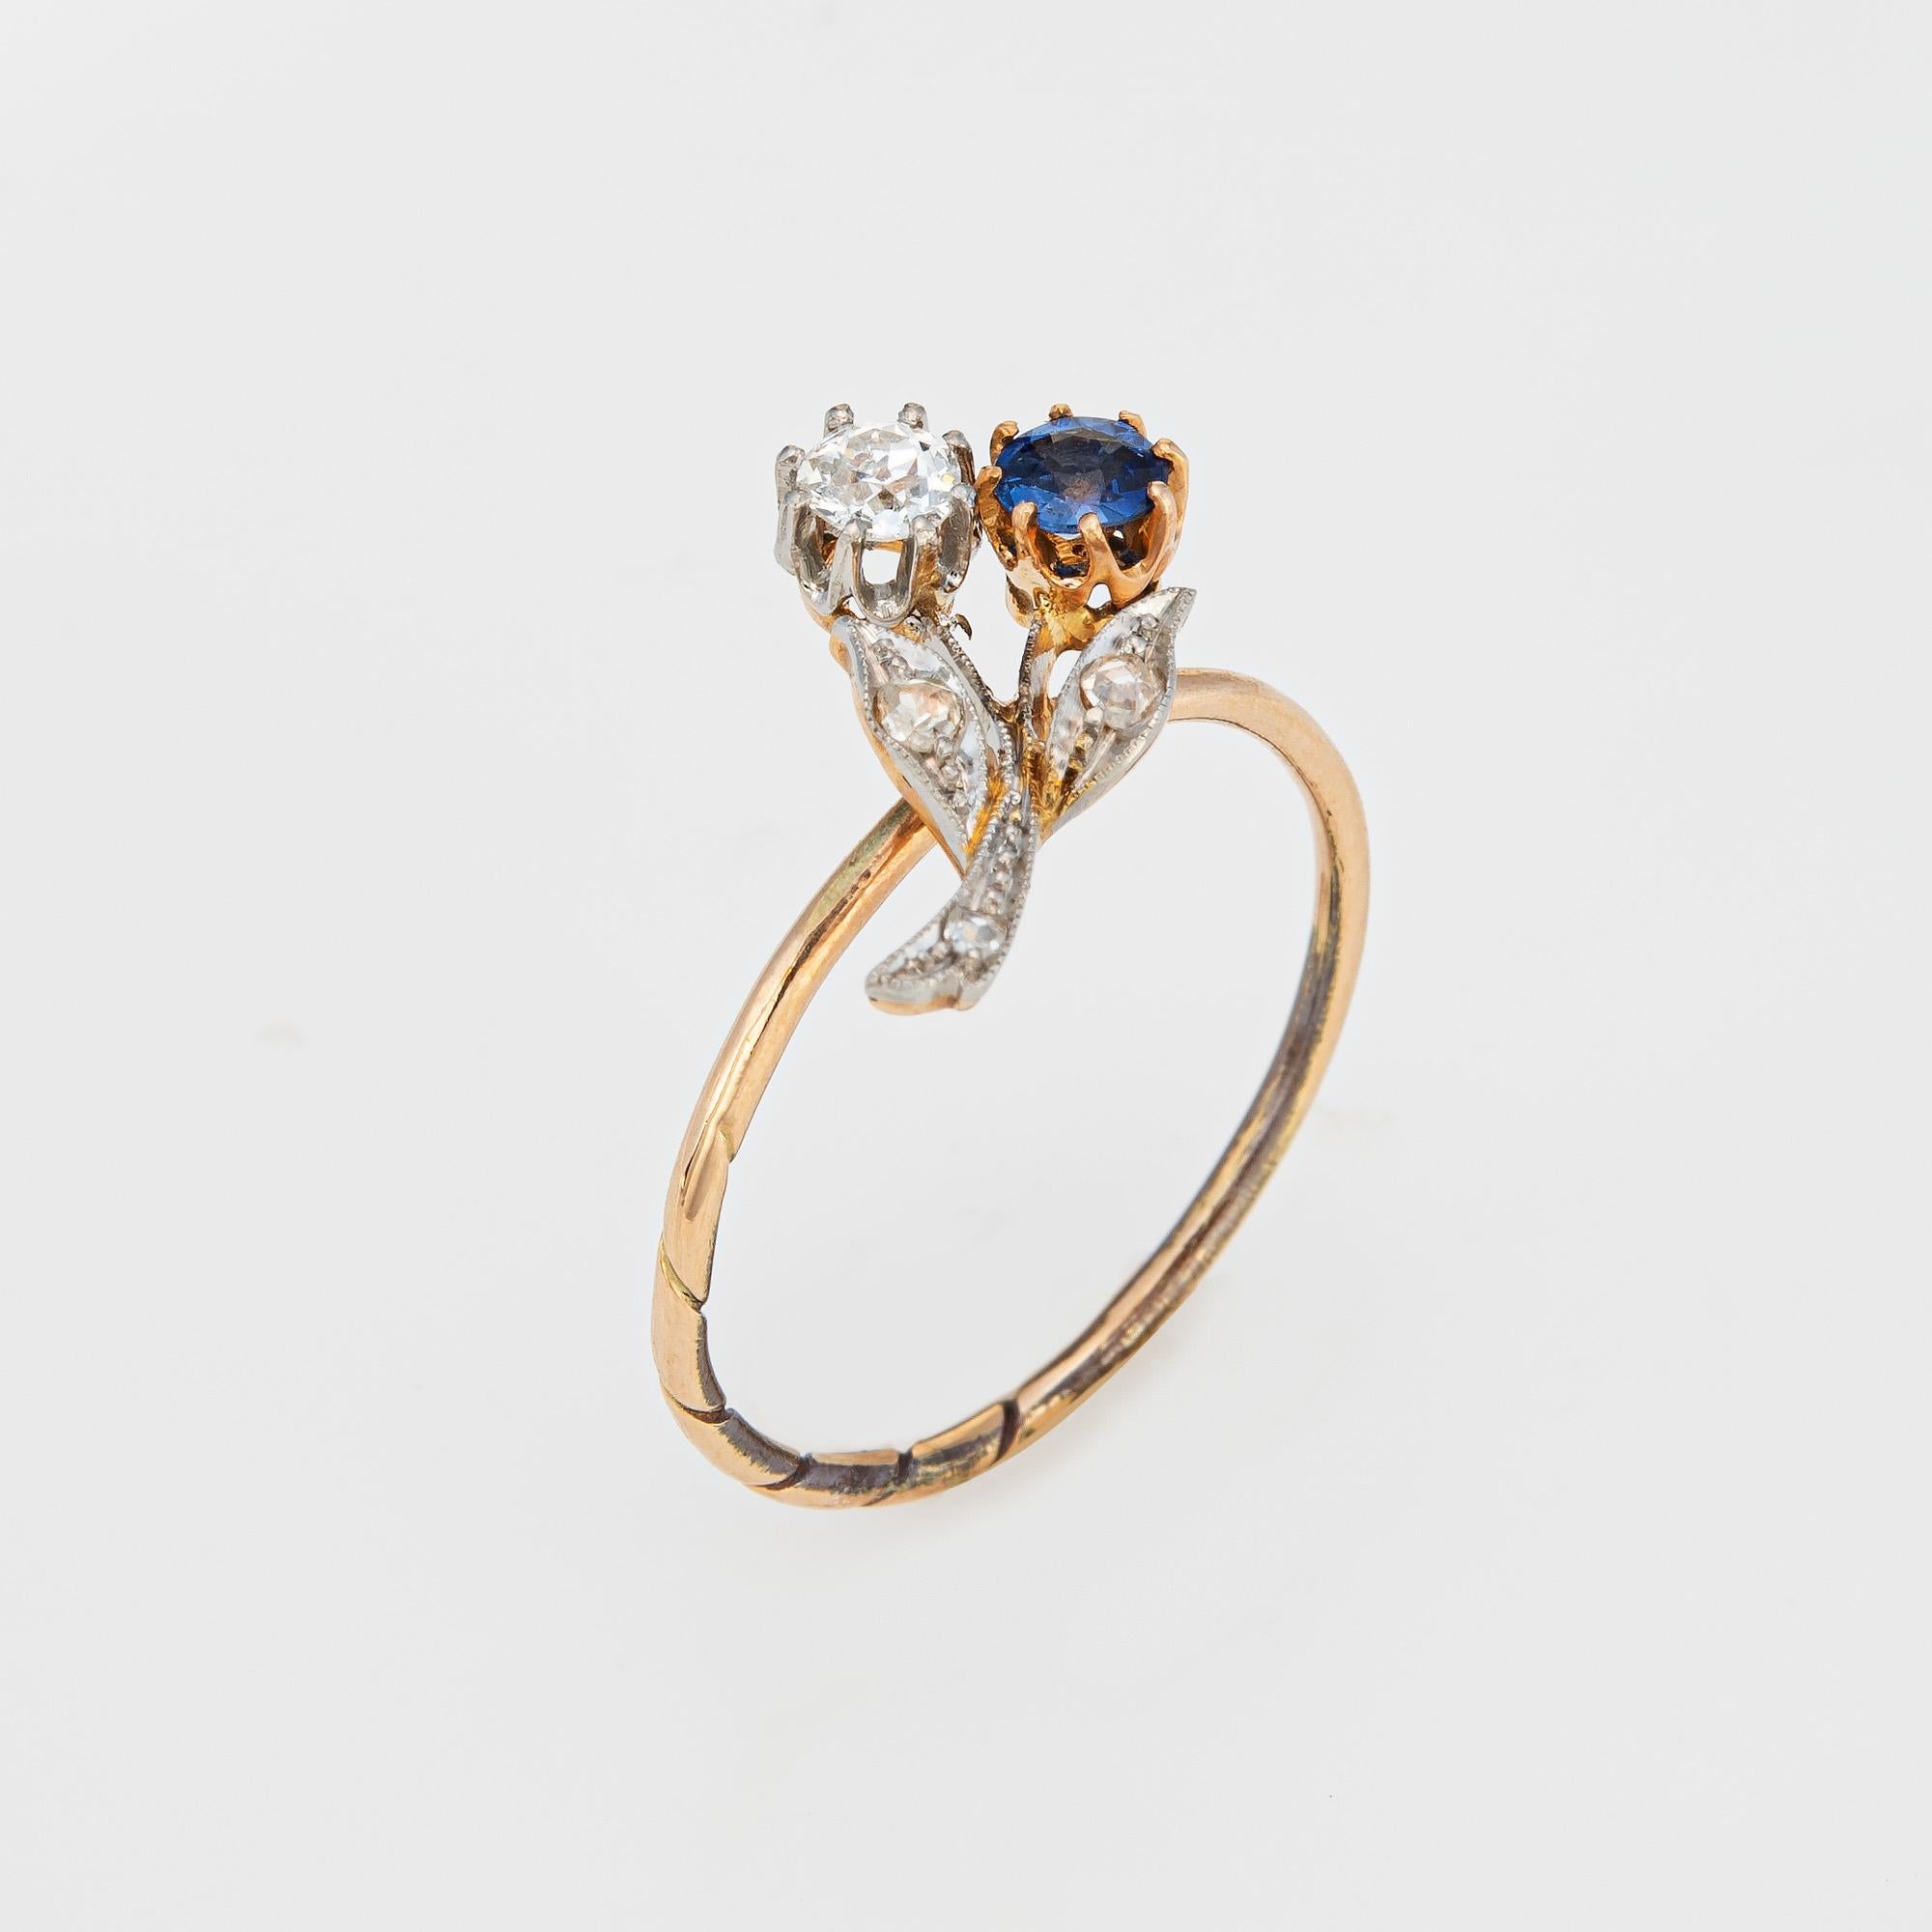 Originally an antique Victorian era stick pin (circa 1880s to 1900s), the sapphire & diamond ring is crafted in 14 karat yellow gold.

The ring is mounted with the original stick pin. Our jeweler rounded the stick pin into a slim band for the